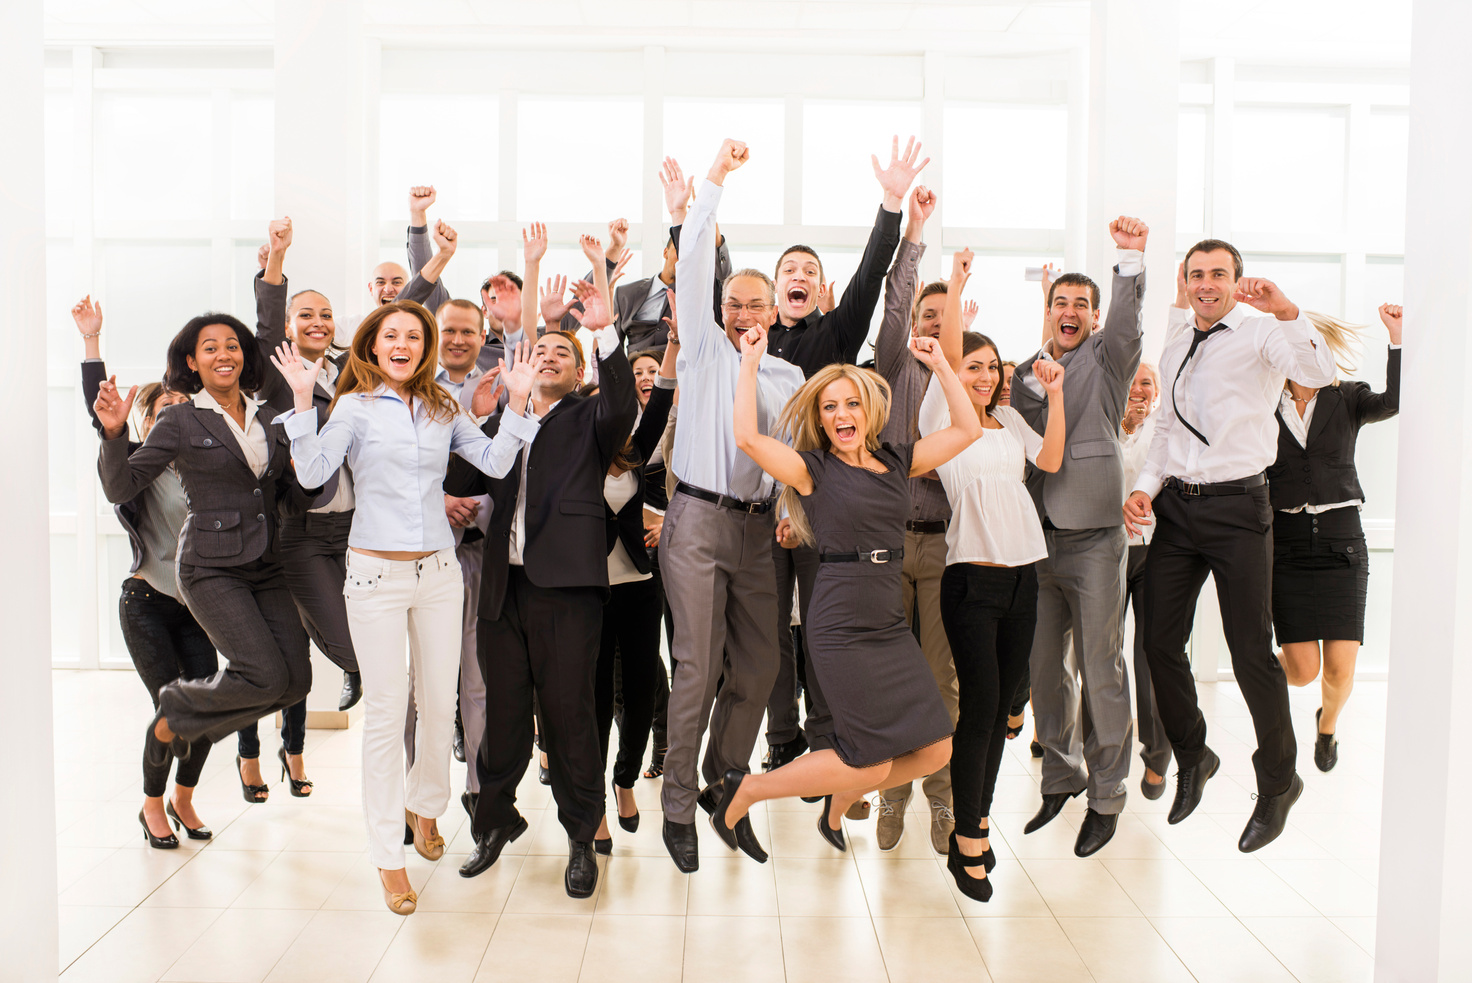 Large group of cheerful business people jumping.